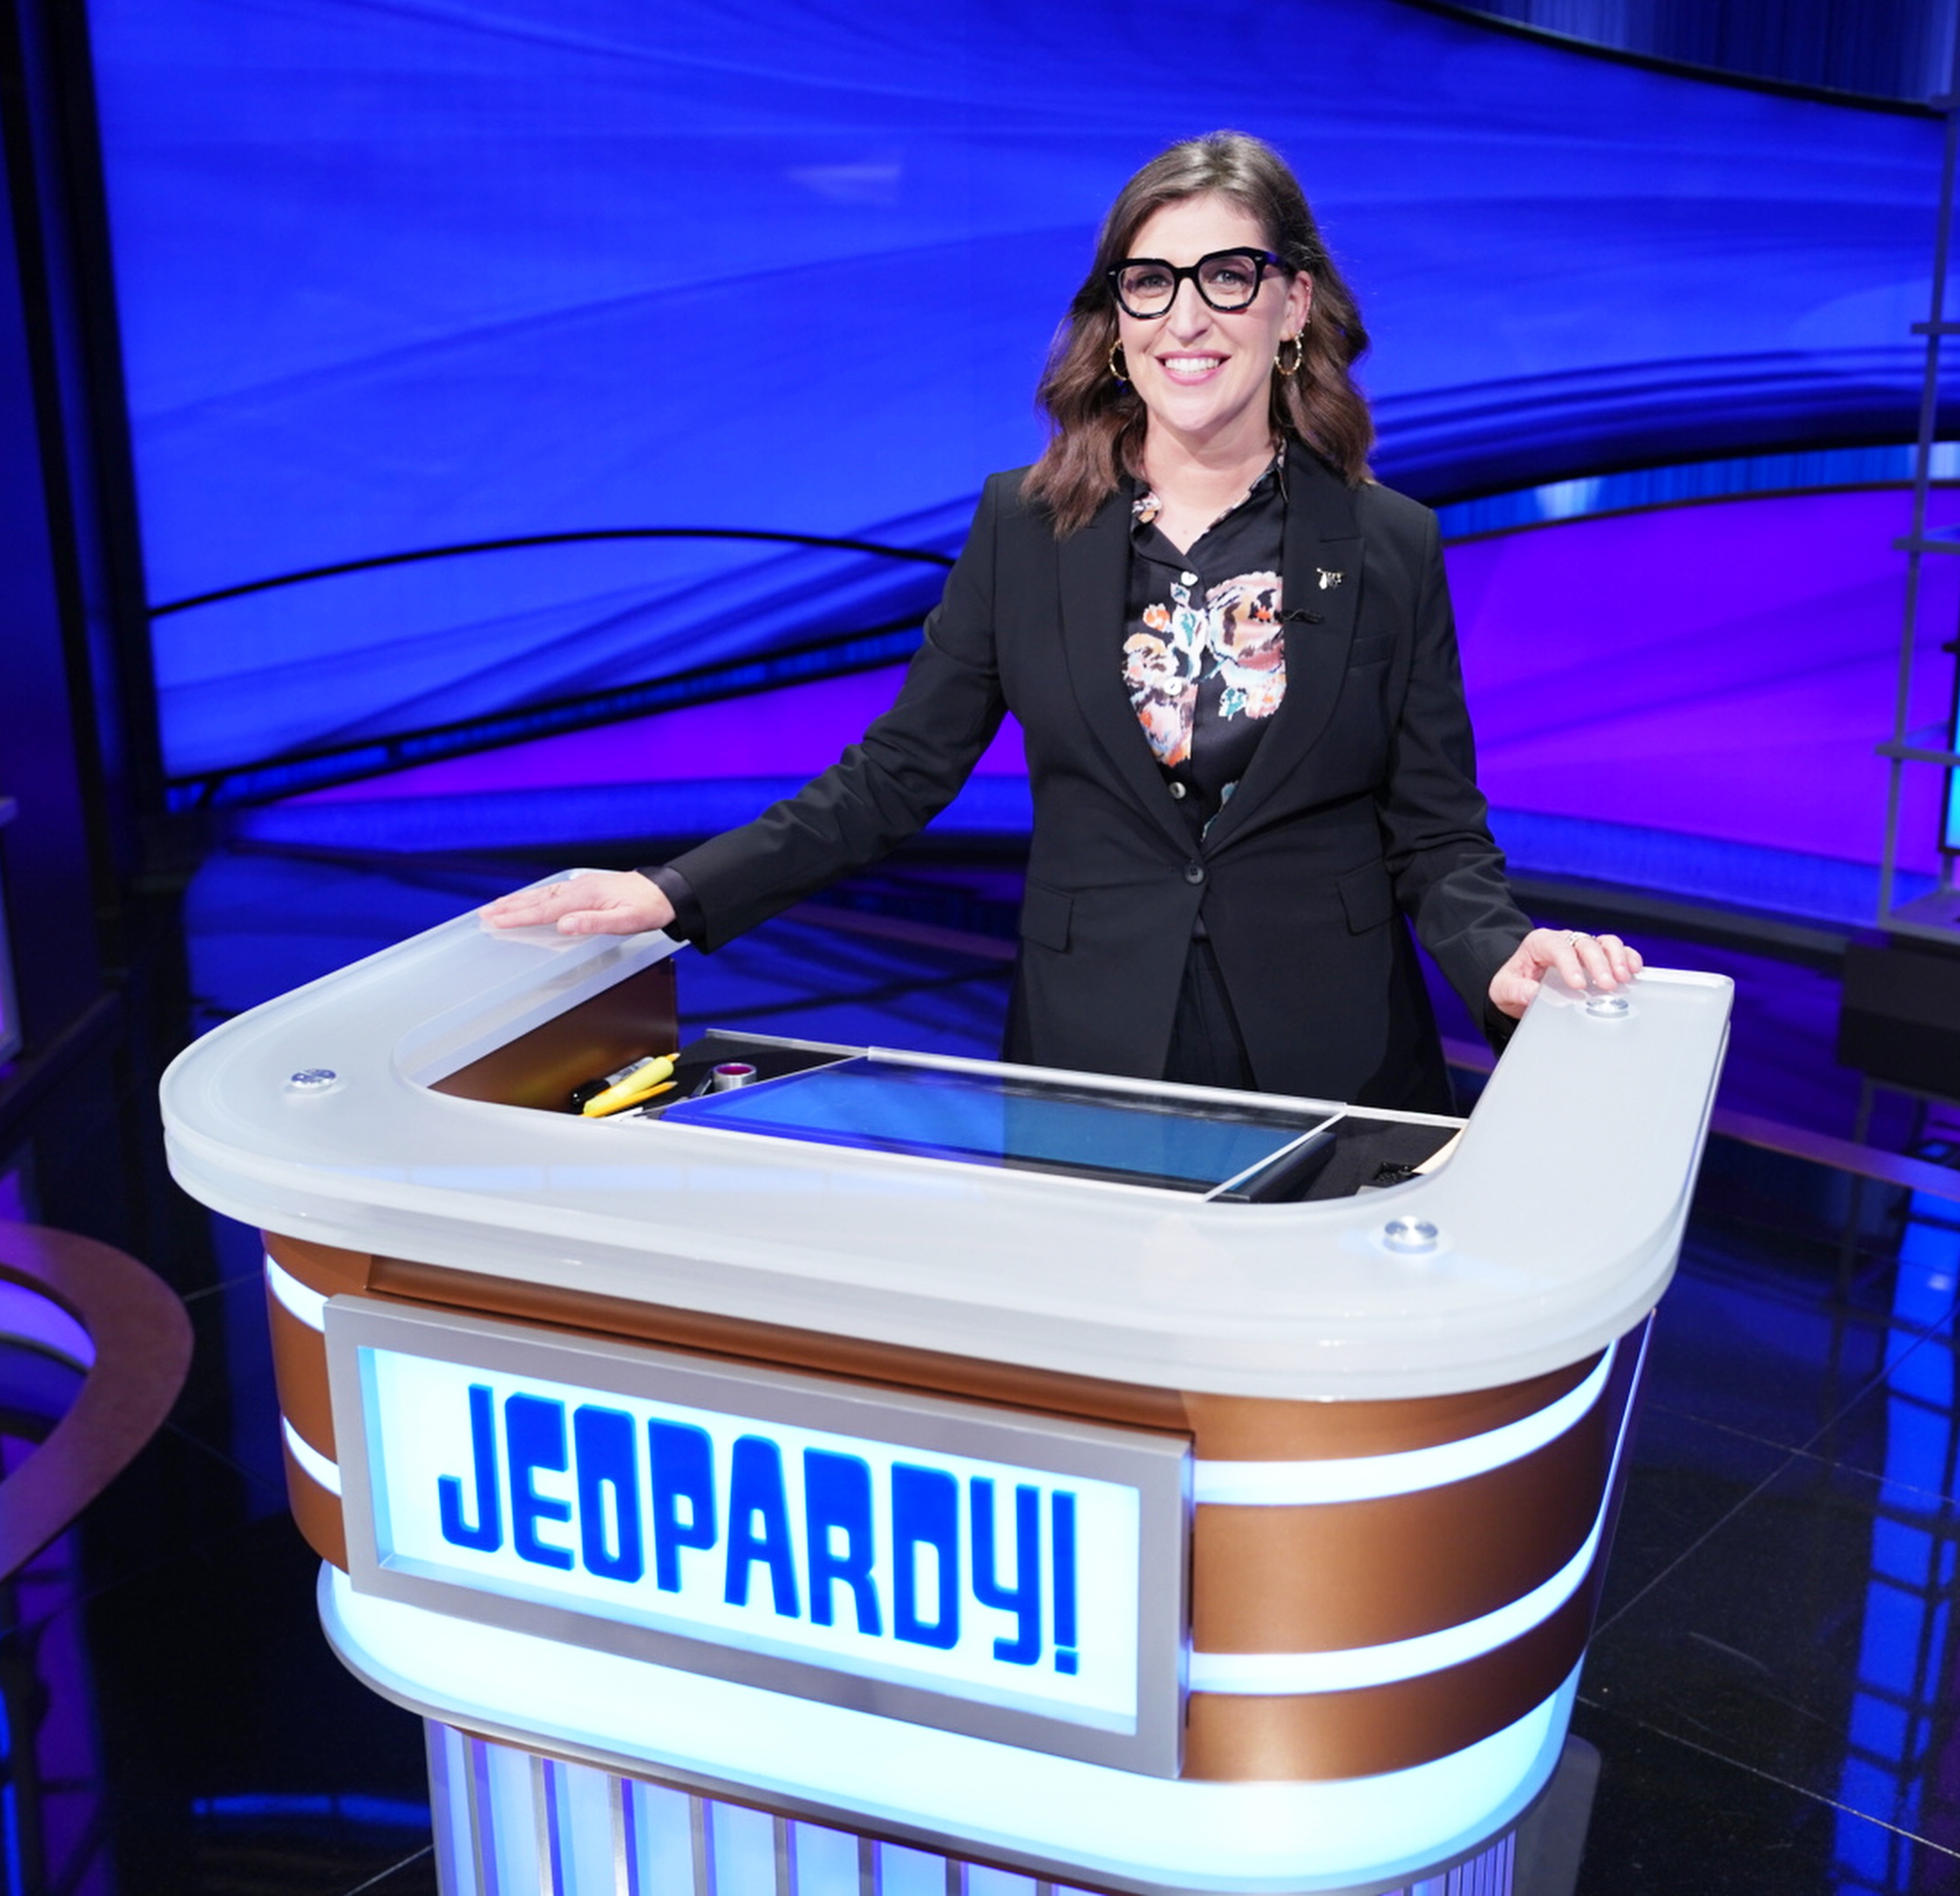 The actress was fired from Jeopardy! earlier this month after going on a hiatus to support the writer's strike